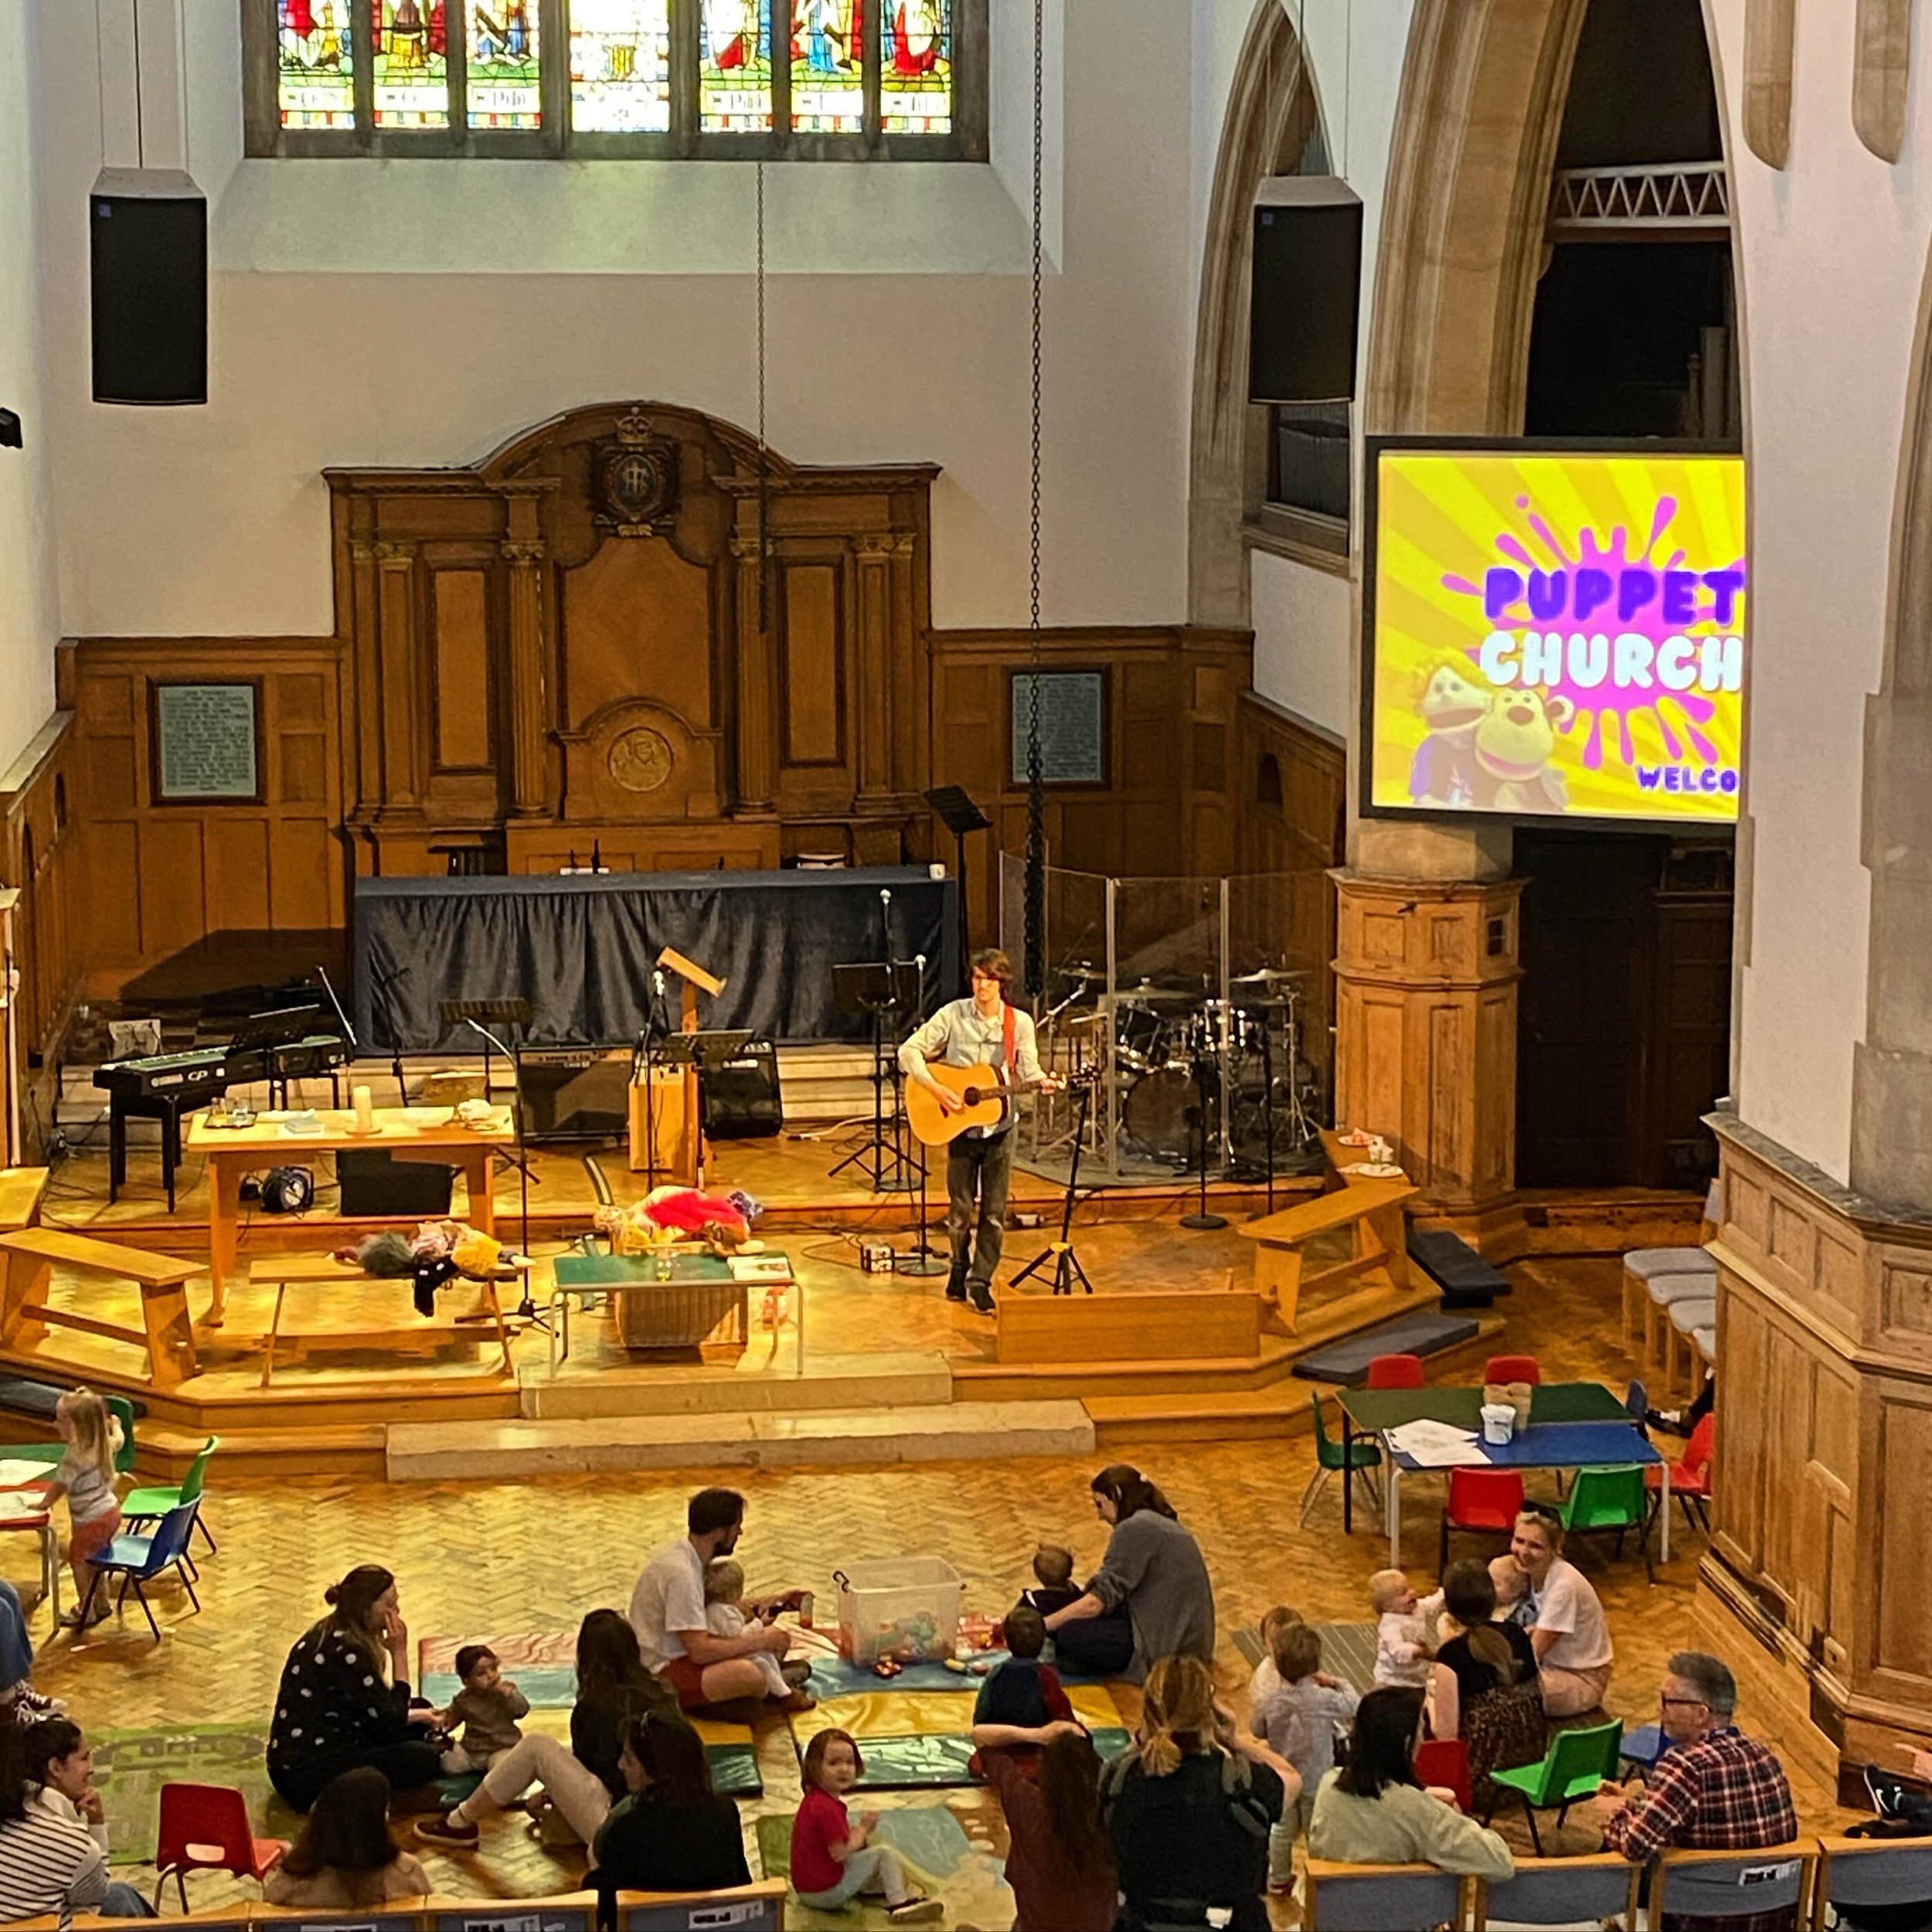 Puppet Church - Tuesday 10:30am - come and join the FUN. Singing, puppets, craft, stories and play - preschoolers assemble!
#church #churchofengland #dioceseofsouthwark #familychurch #kidsworship #sw18mums #southfields #wandsworth